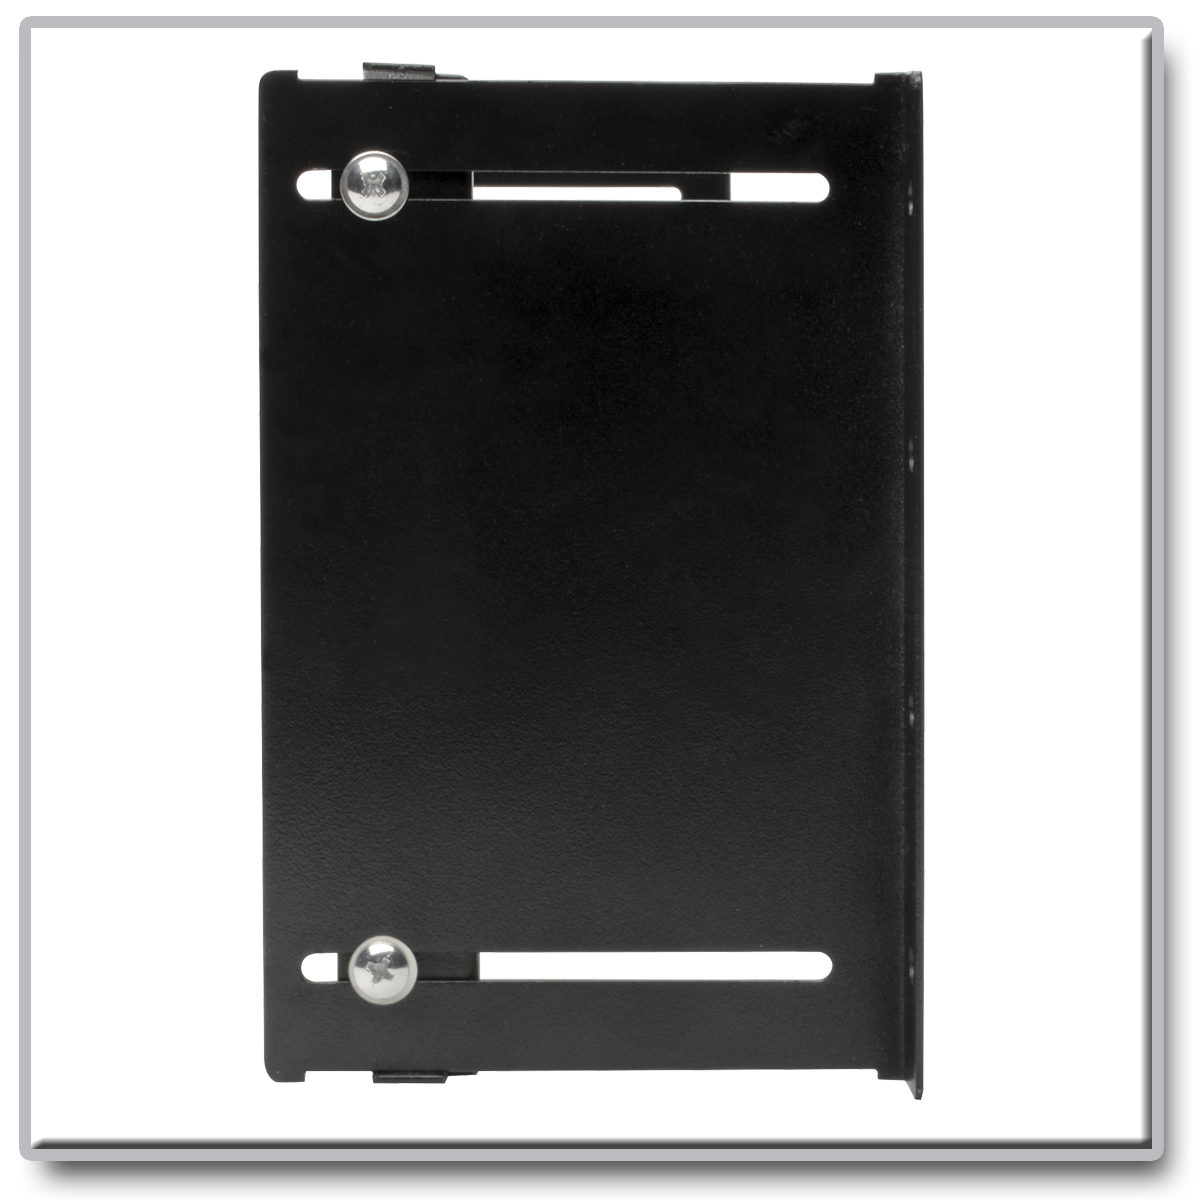 LCD Monitor Mounting 17/19 Bracket (19 Inch Rack-Mount Application)